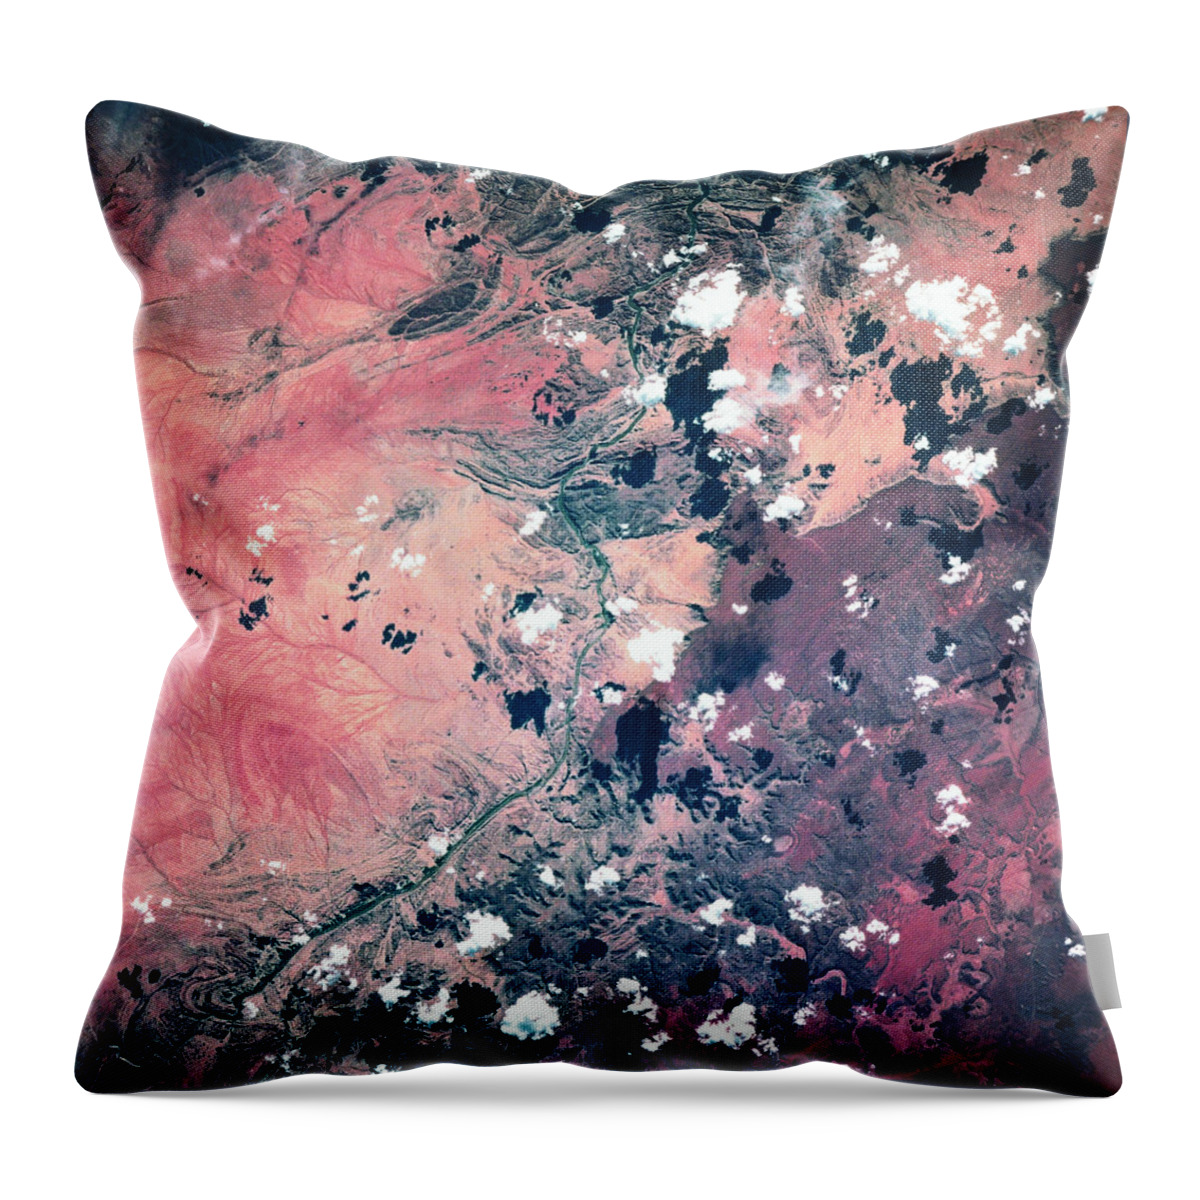 Outdoors Throw Pillow featuring the photograph Landscape Of Earth Viewed From A by Stockbyte